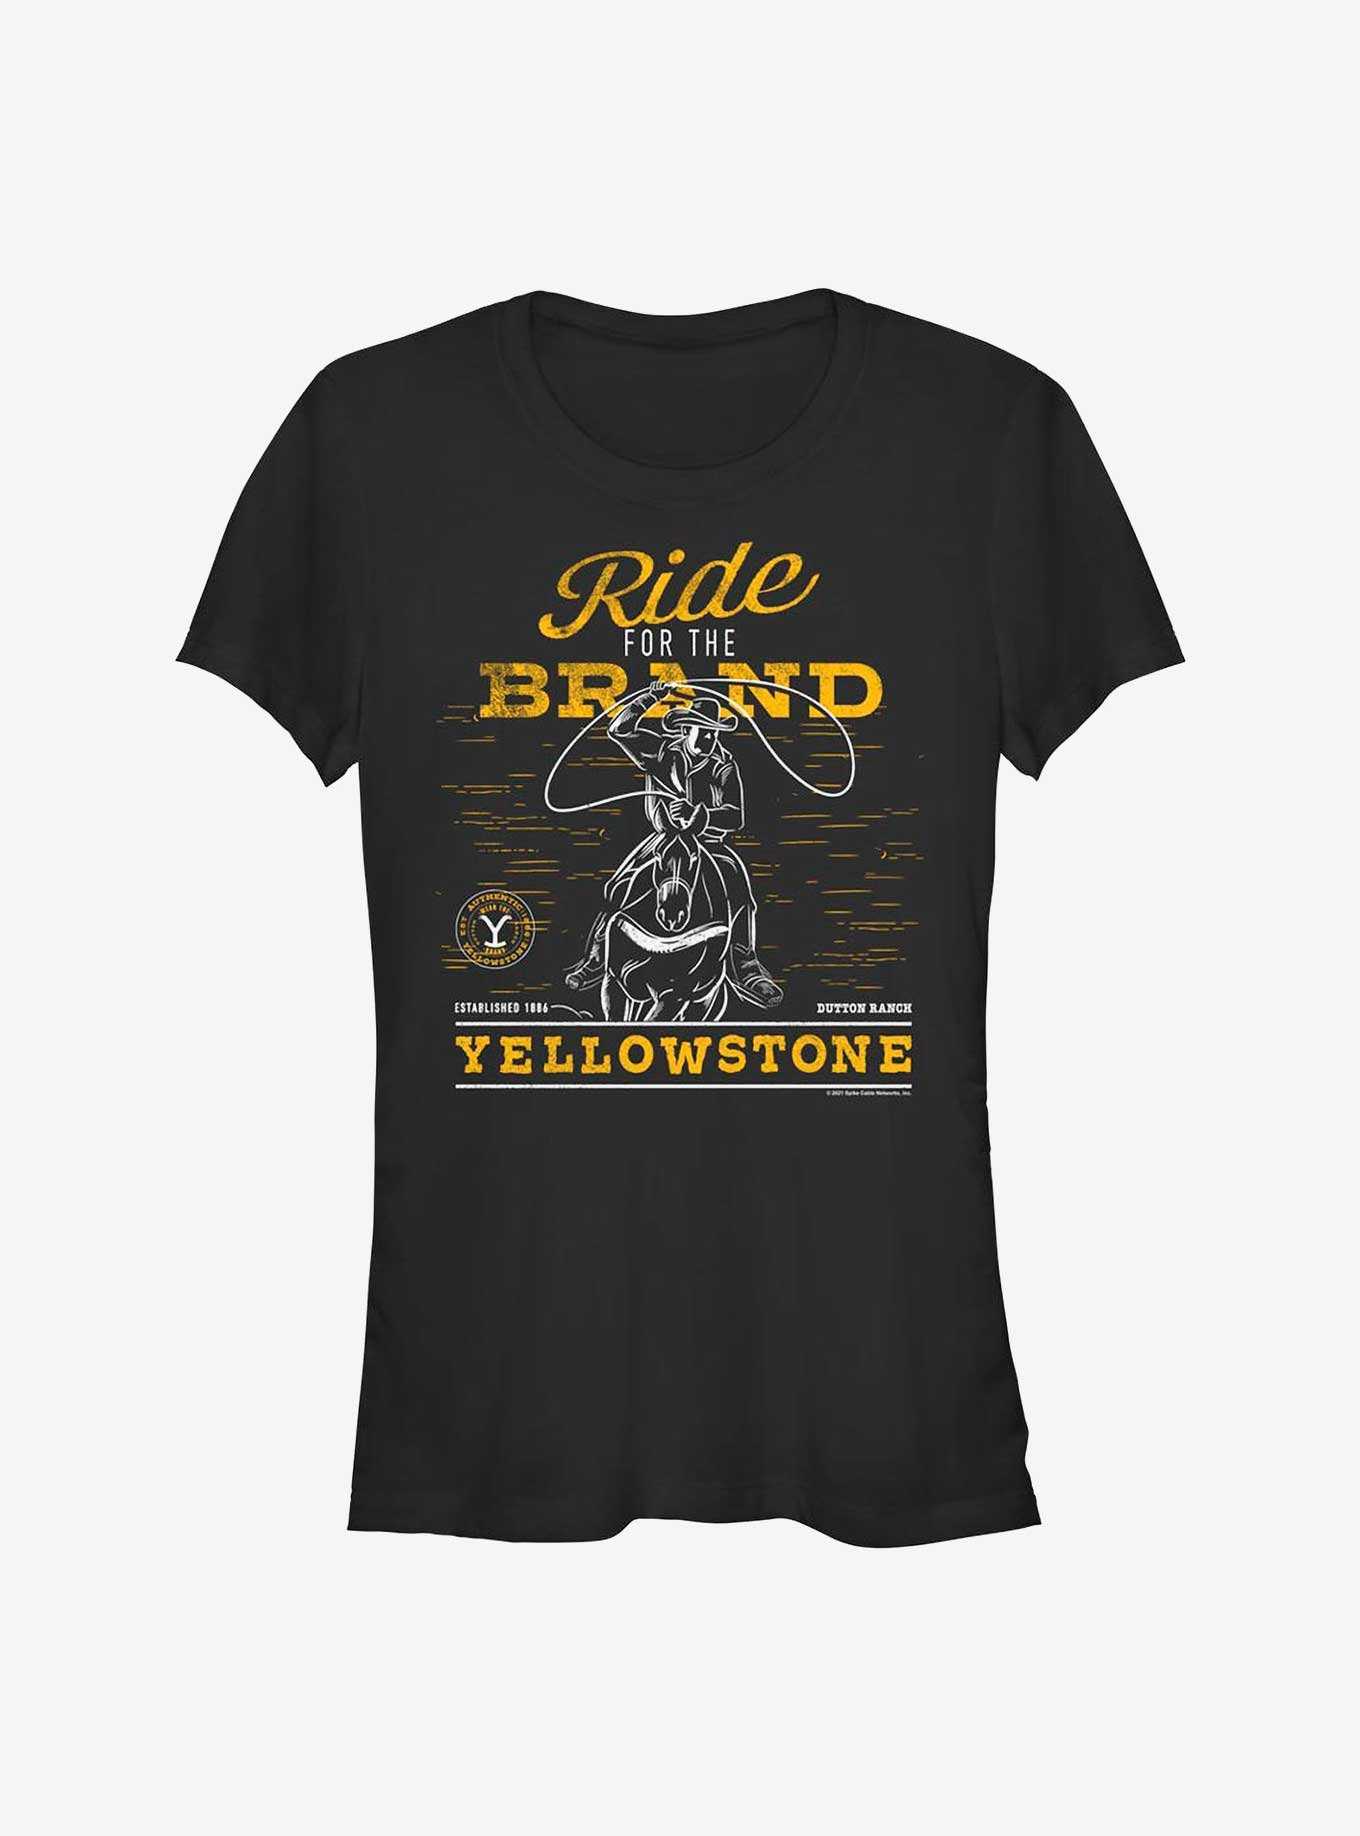 Yellowstone Ride For The Brand Girls T-Shirt, , hi-res